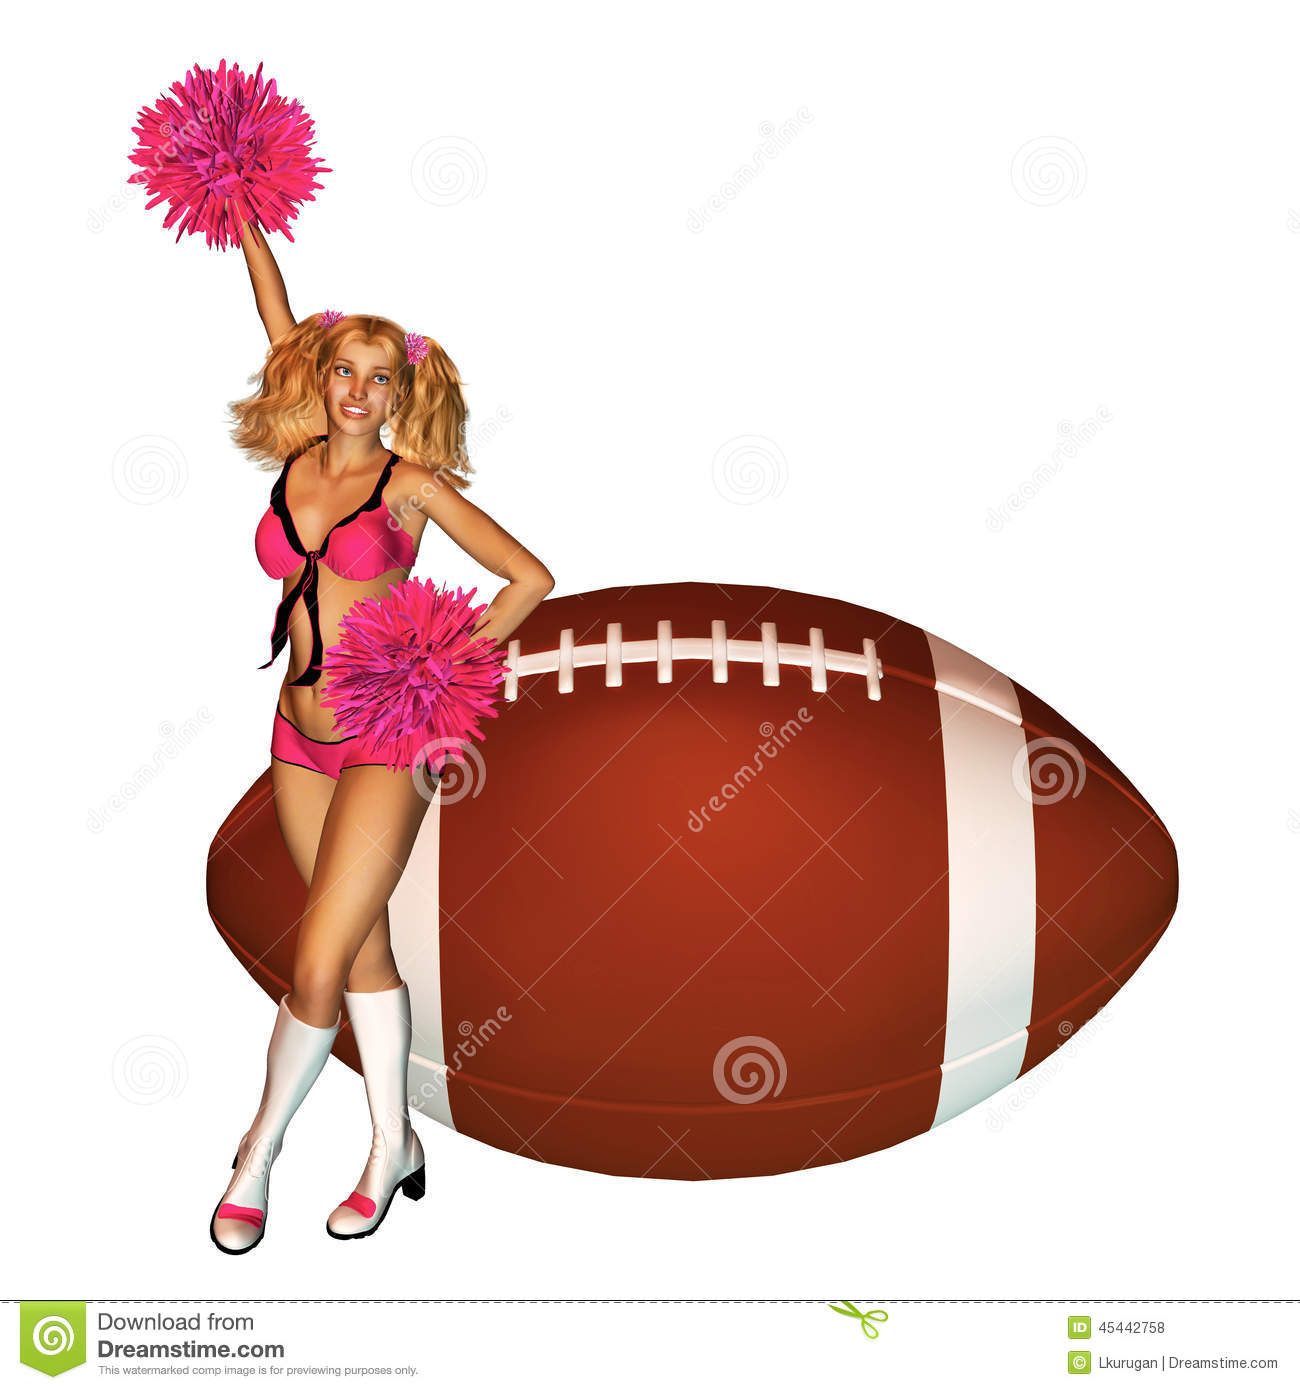     White Boots Holding Pink Pom Poms With Large Football Mr No Pr No 1 68